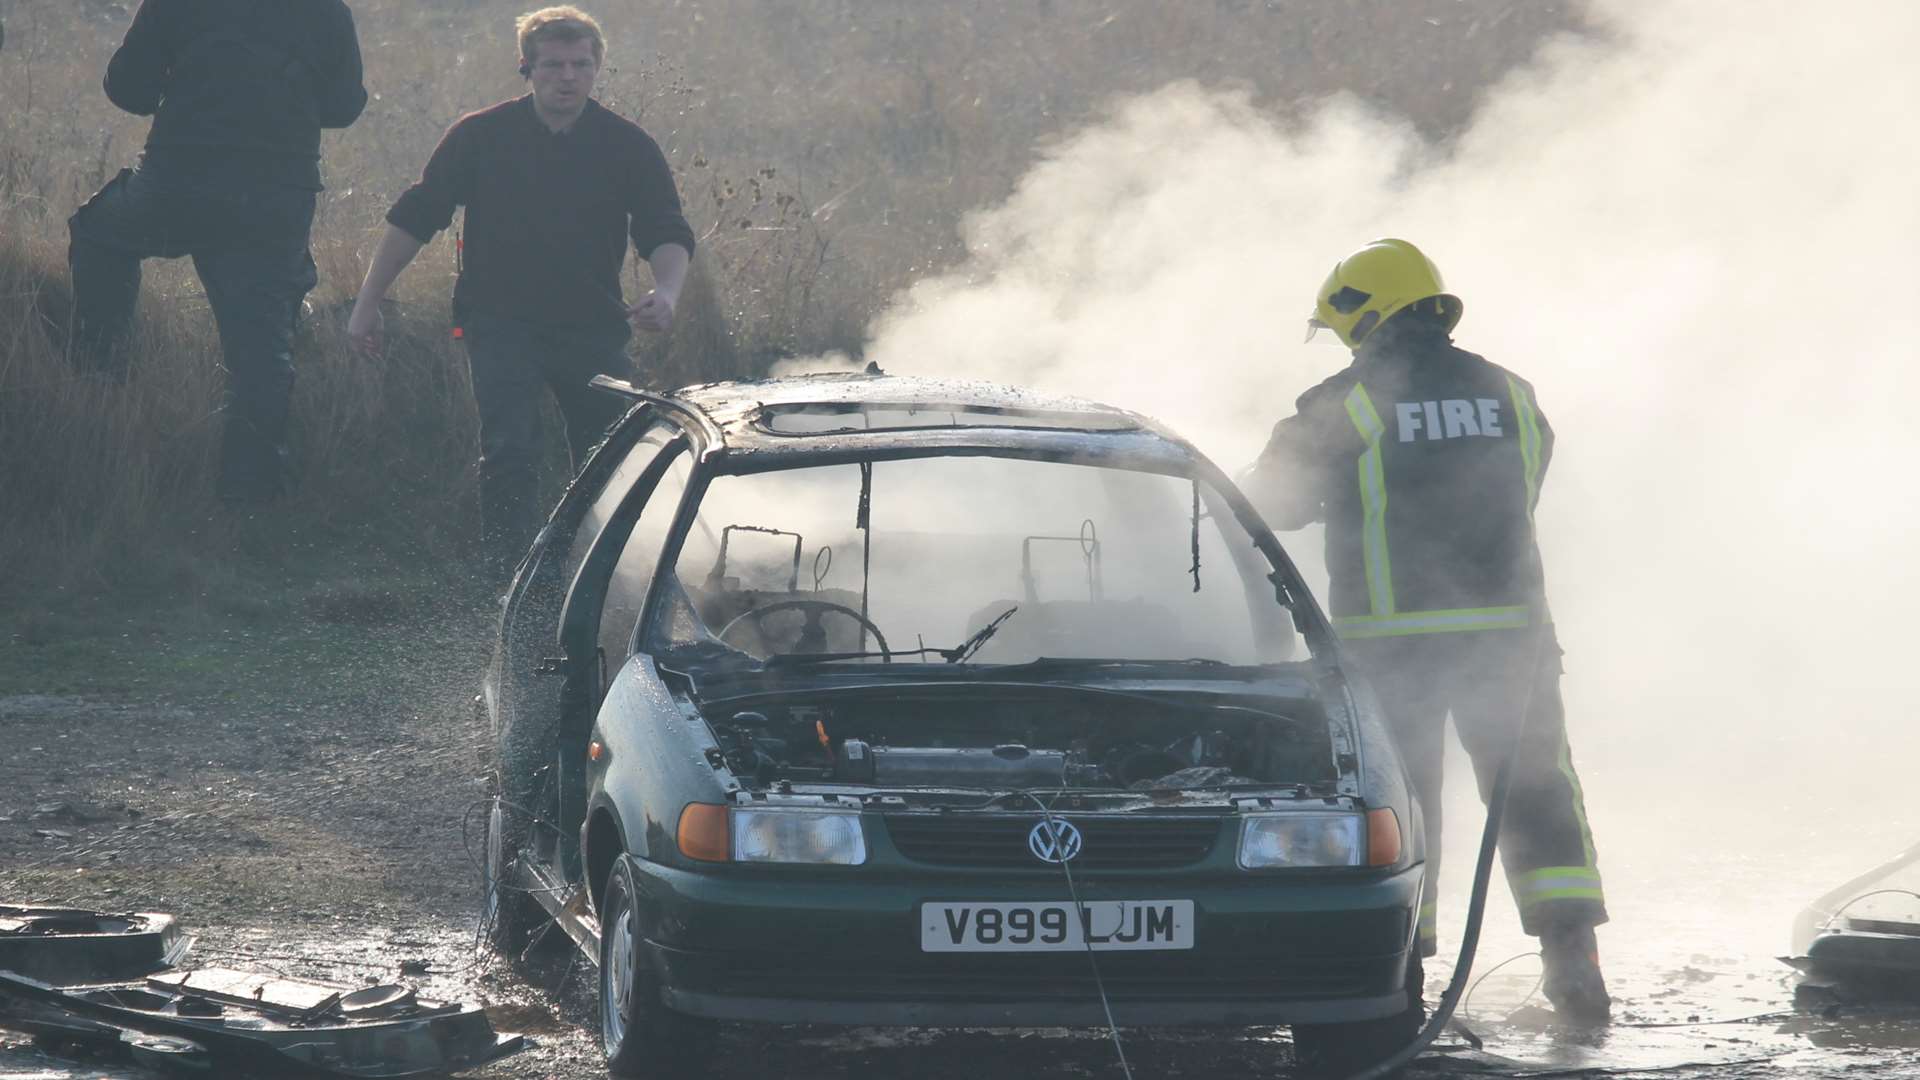 A fireman tackles the blaze after a car was blown up in Leysdown for the new TV series Kiss Me First